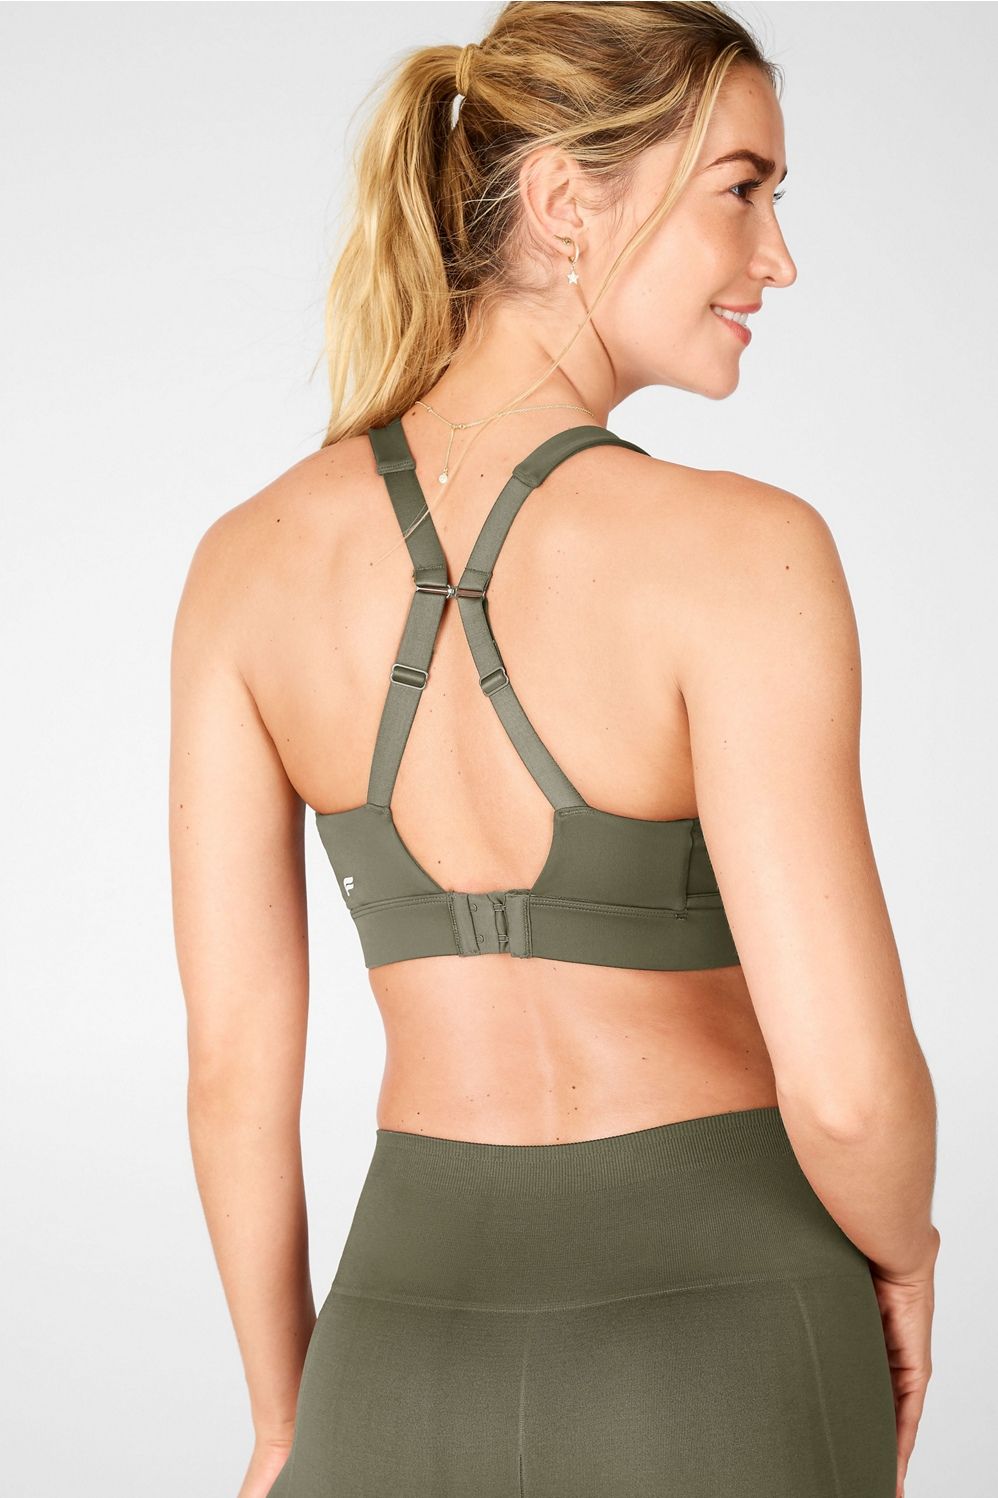 All Day Every Day Adjustable Bra | Fabletics